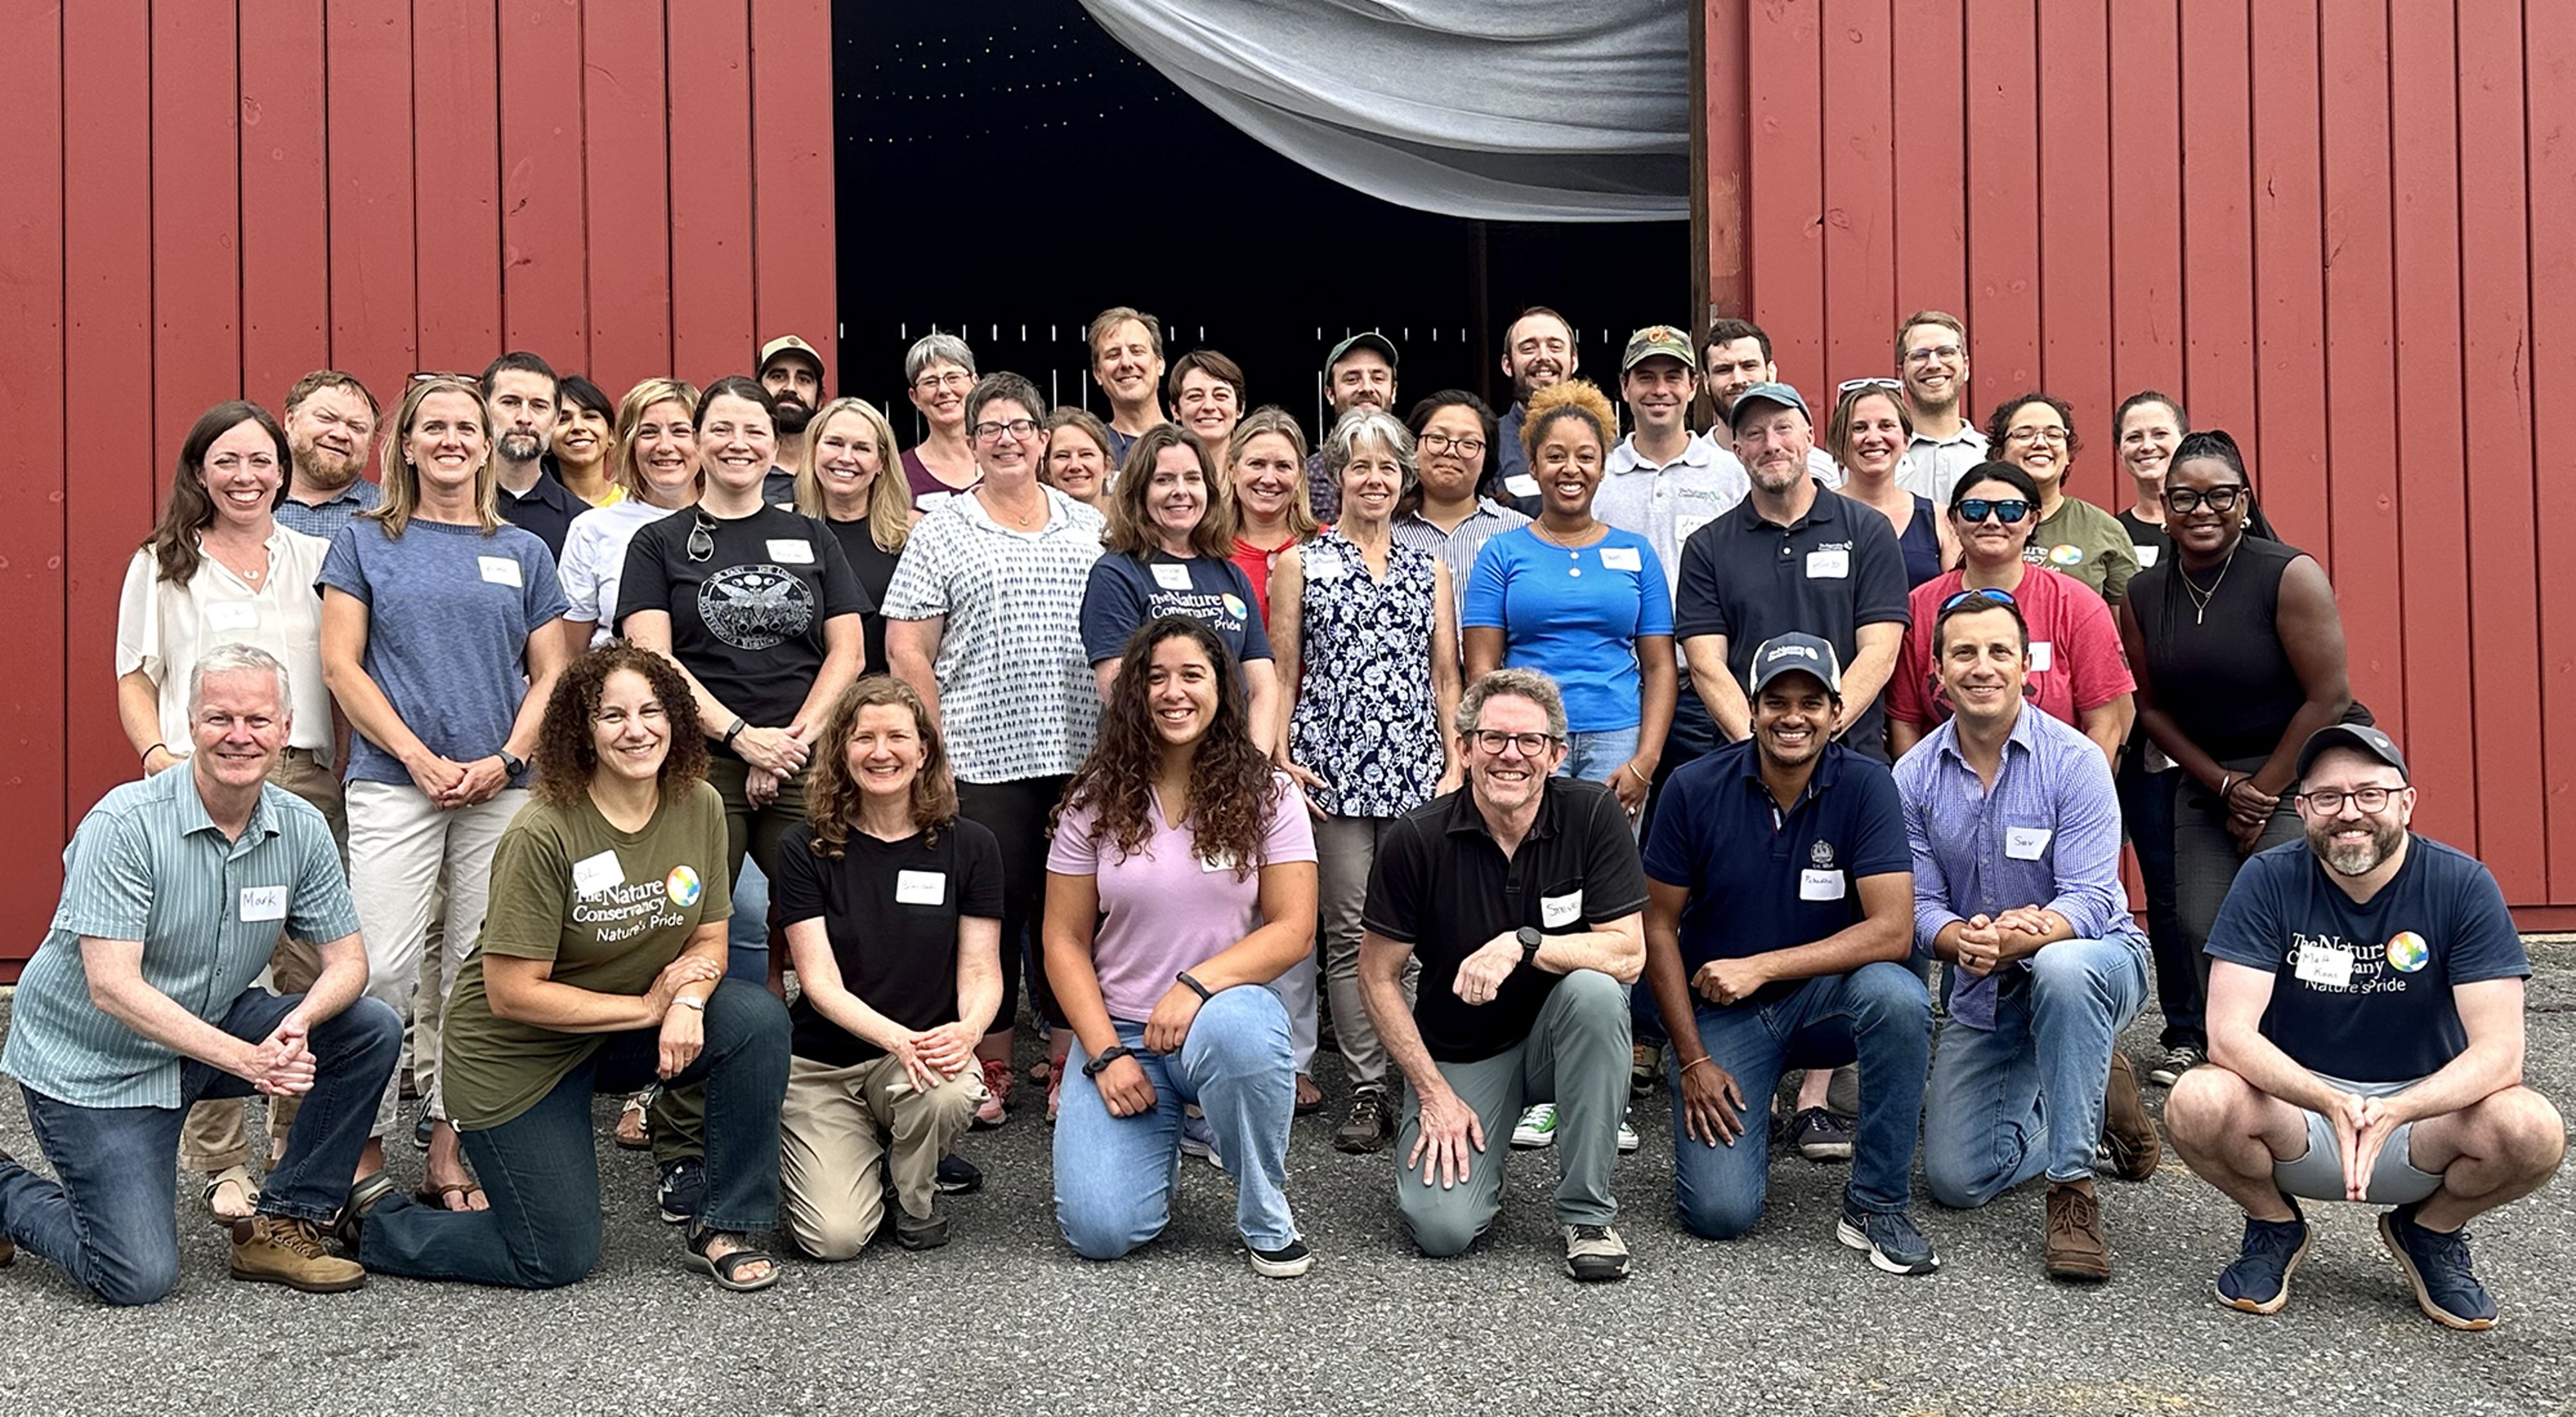 Group photo of TNC MD/DC staff. A large group of people stand together outdoors in front of a red barn, smiling during the chapter's annual staff retreat.